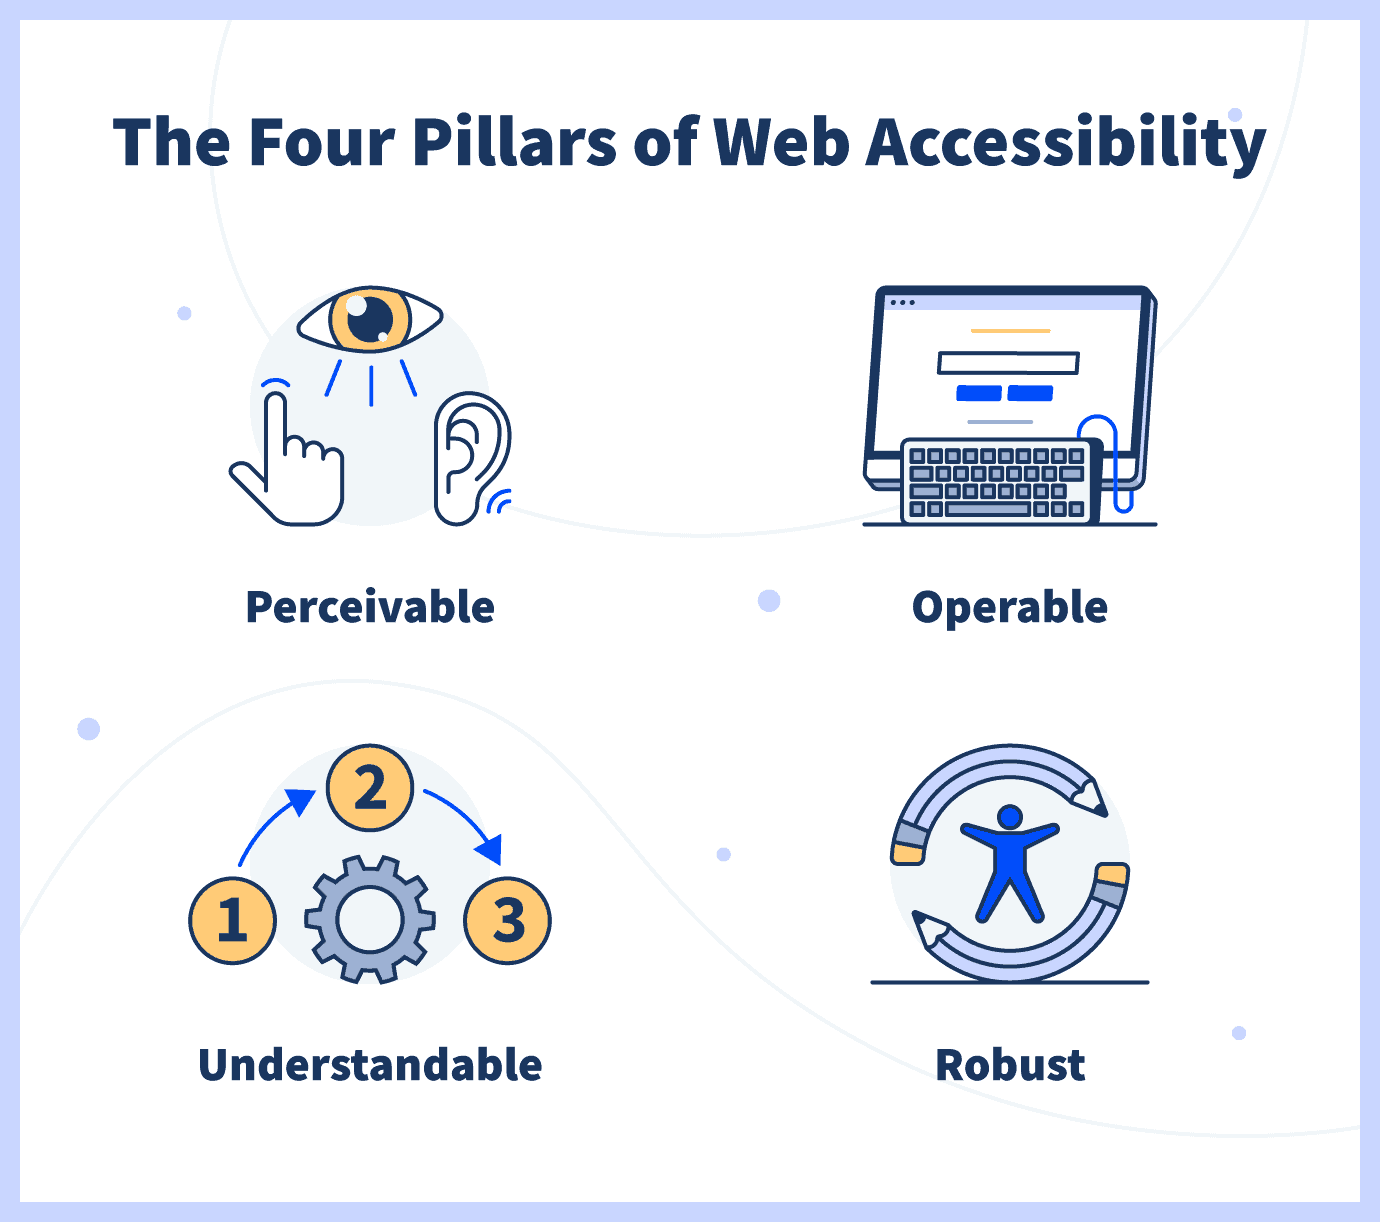 The Four Pillars of Web Accessibility: Perceivable, Understandable, Operable, Robust